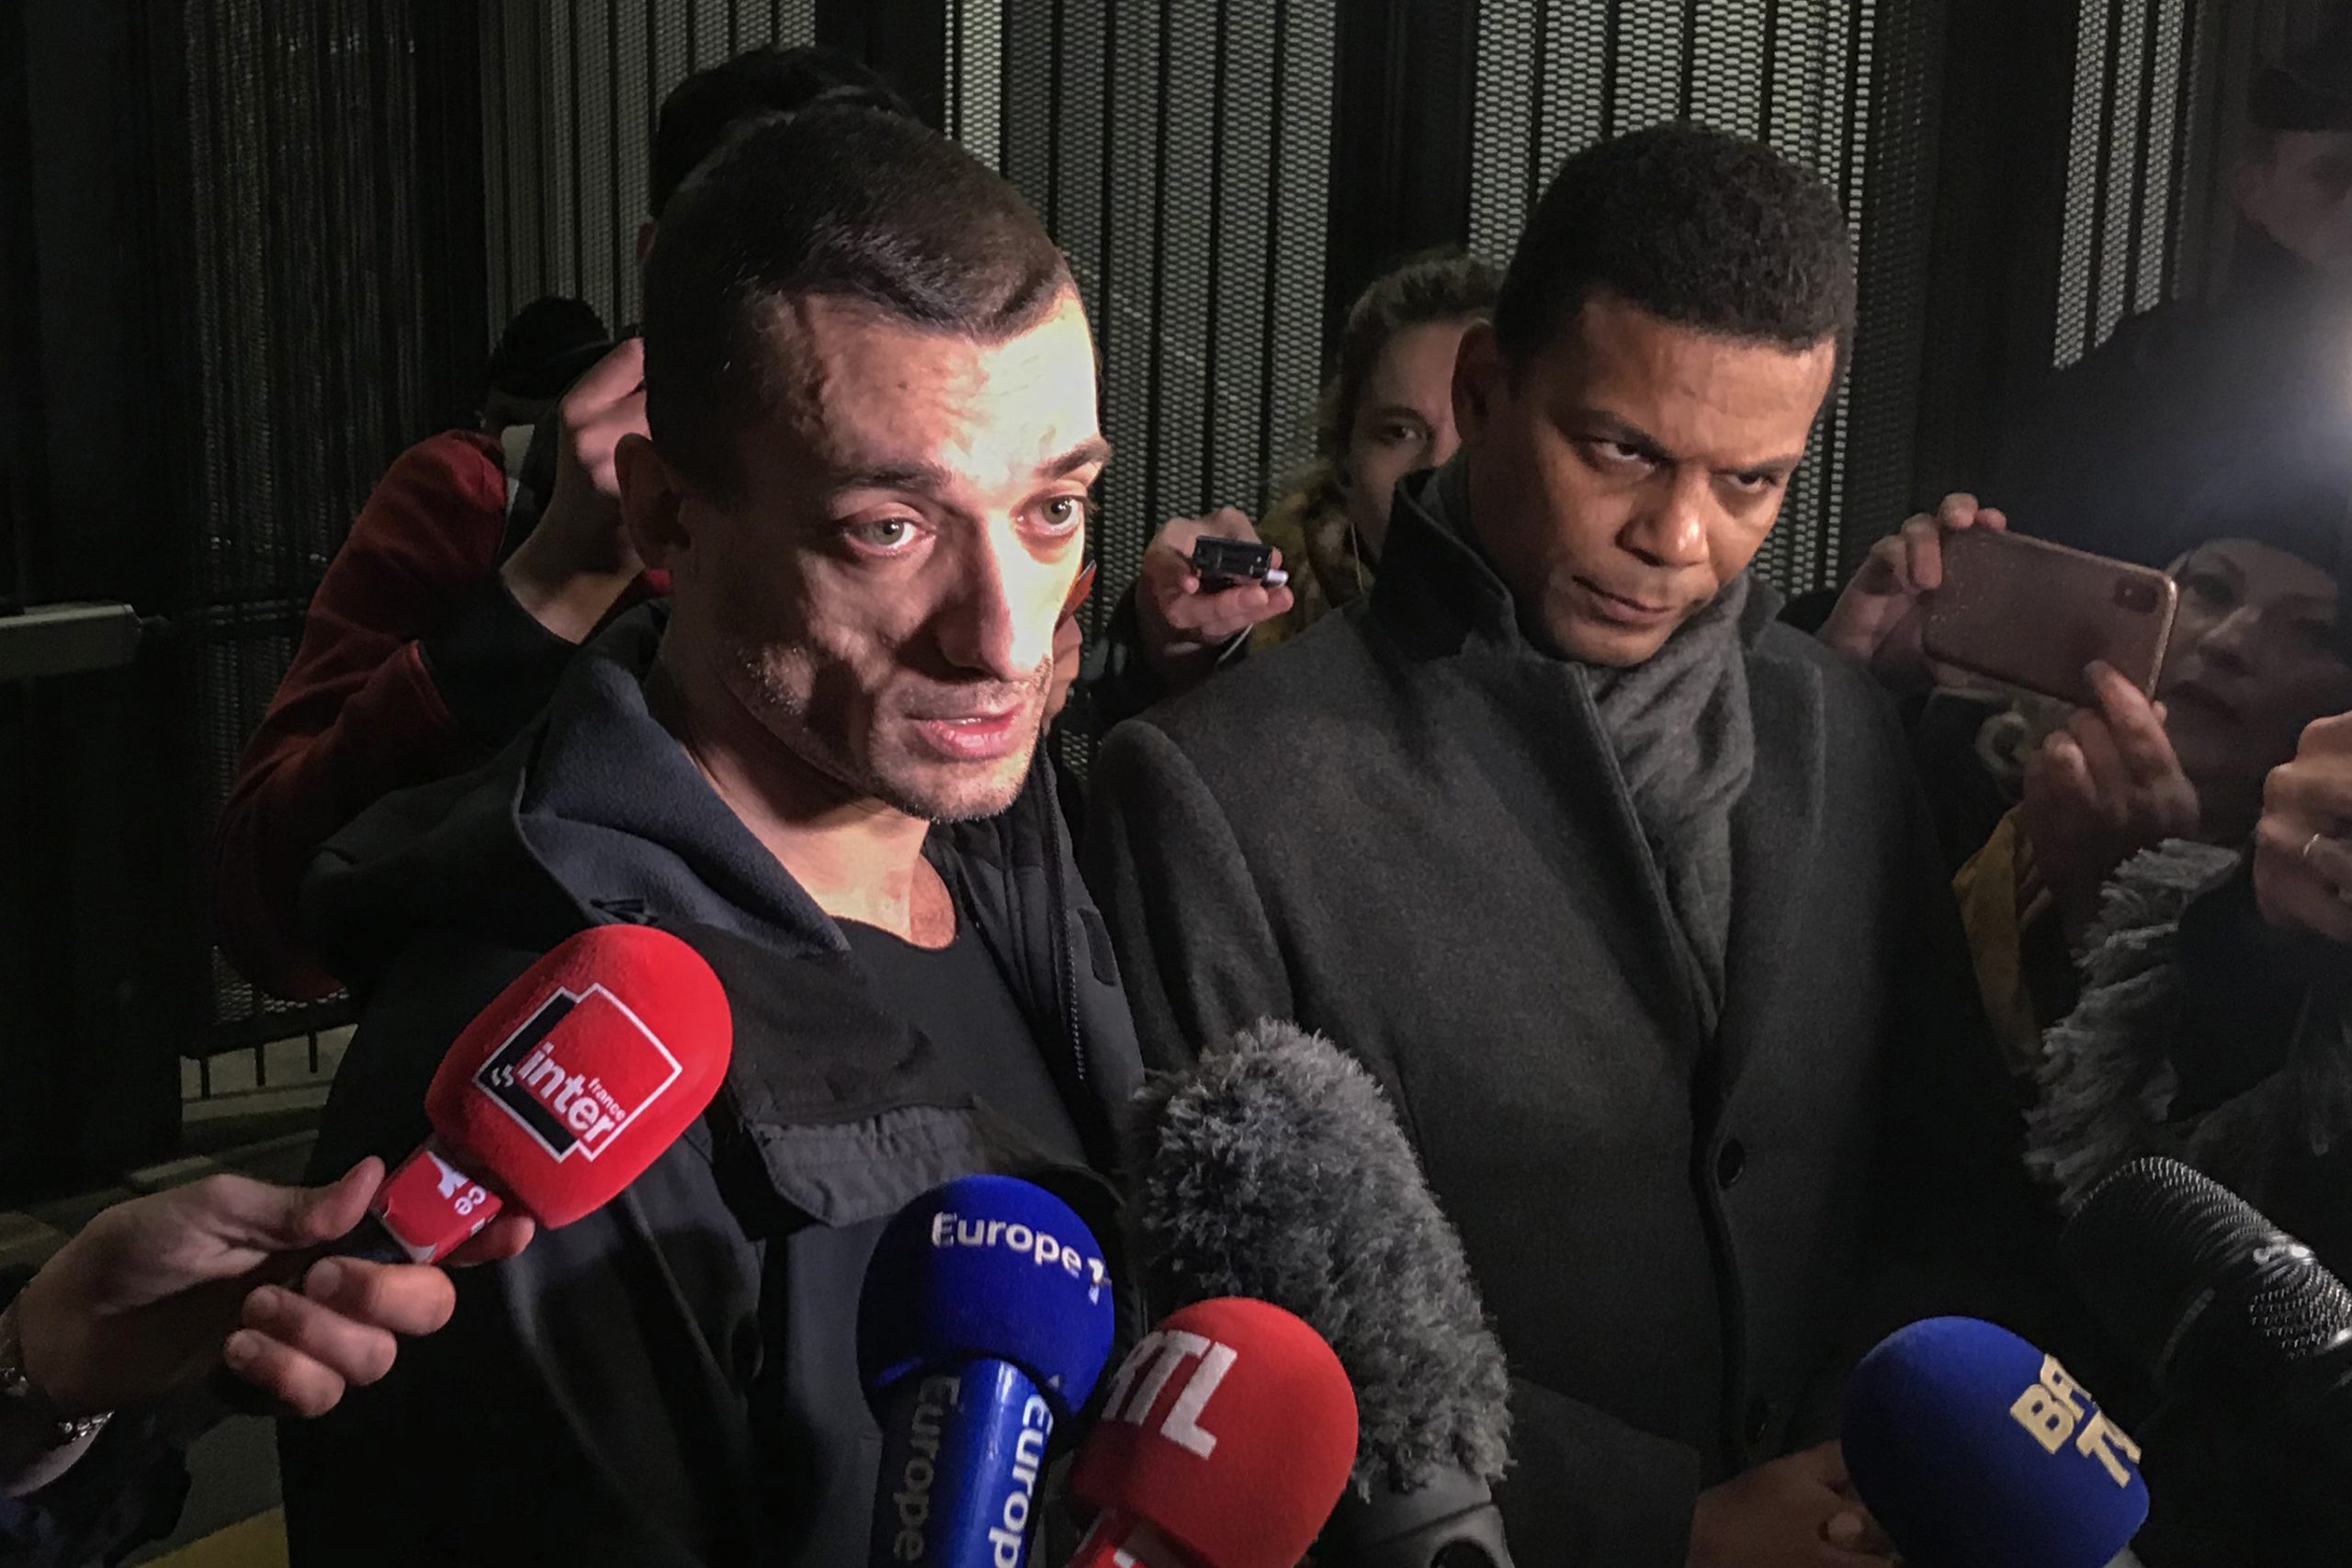 Xvideo In Englis - You're a Big Imbecile': Russian Artist Pyotr Pavlensky's Trial Over a  Leaked Video That Brought Down a Politician Concludes With a Tense Spectacle